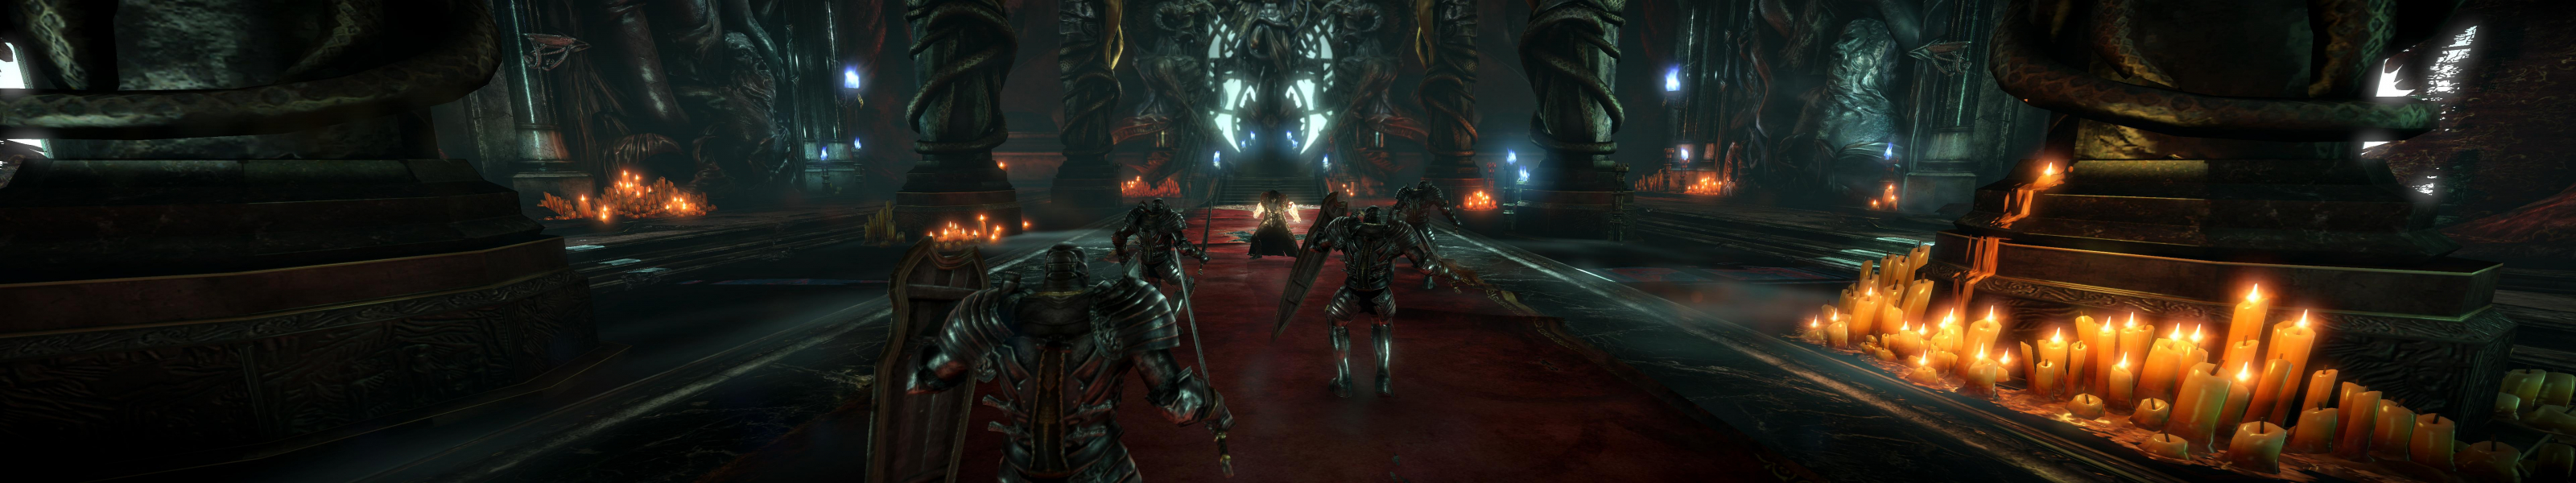 Castlevania: Lords of Shadow 2 - GameHall